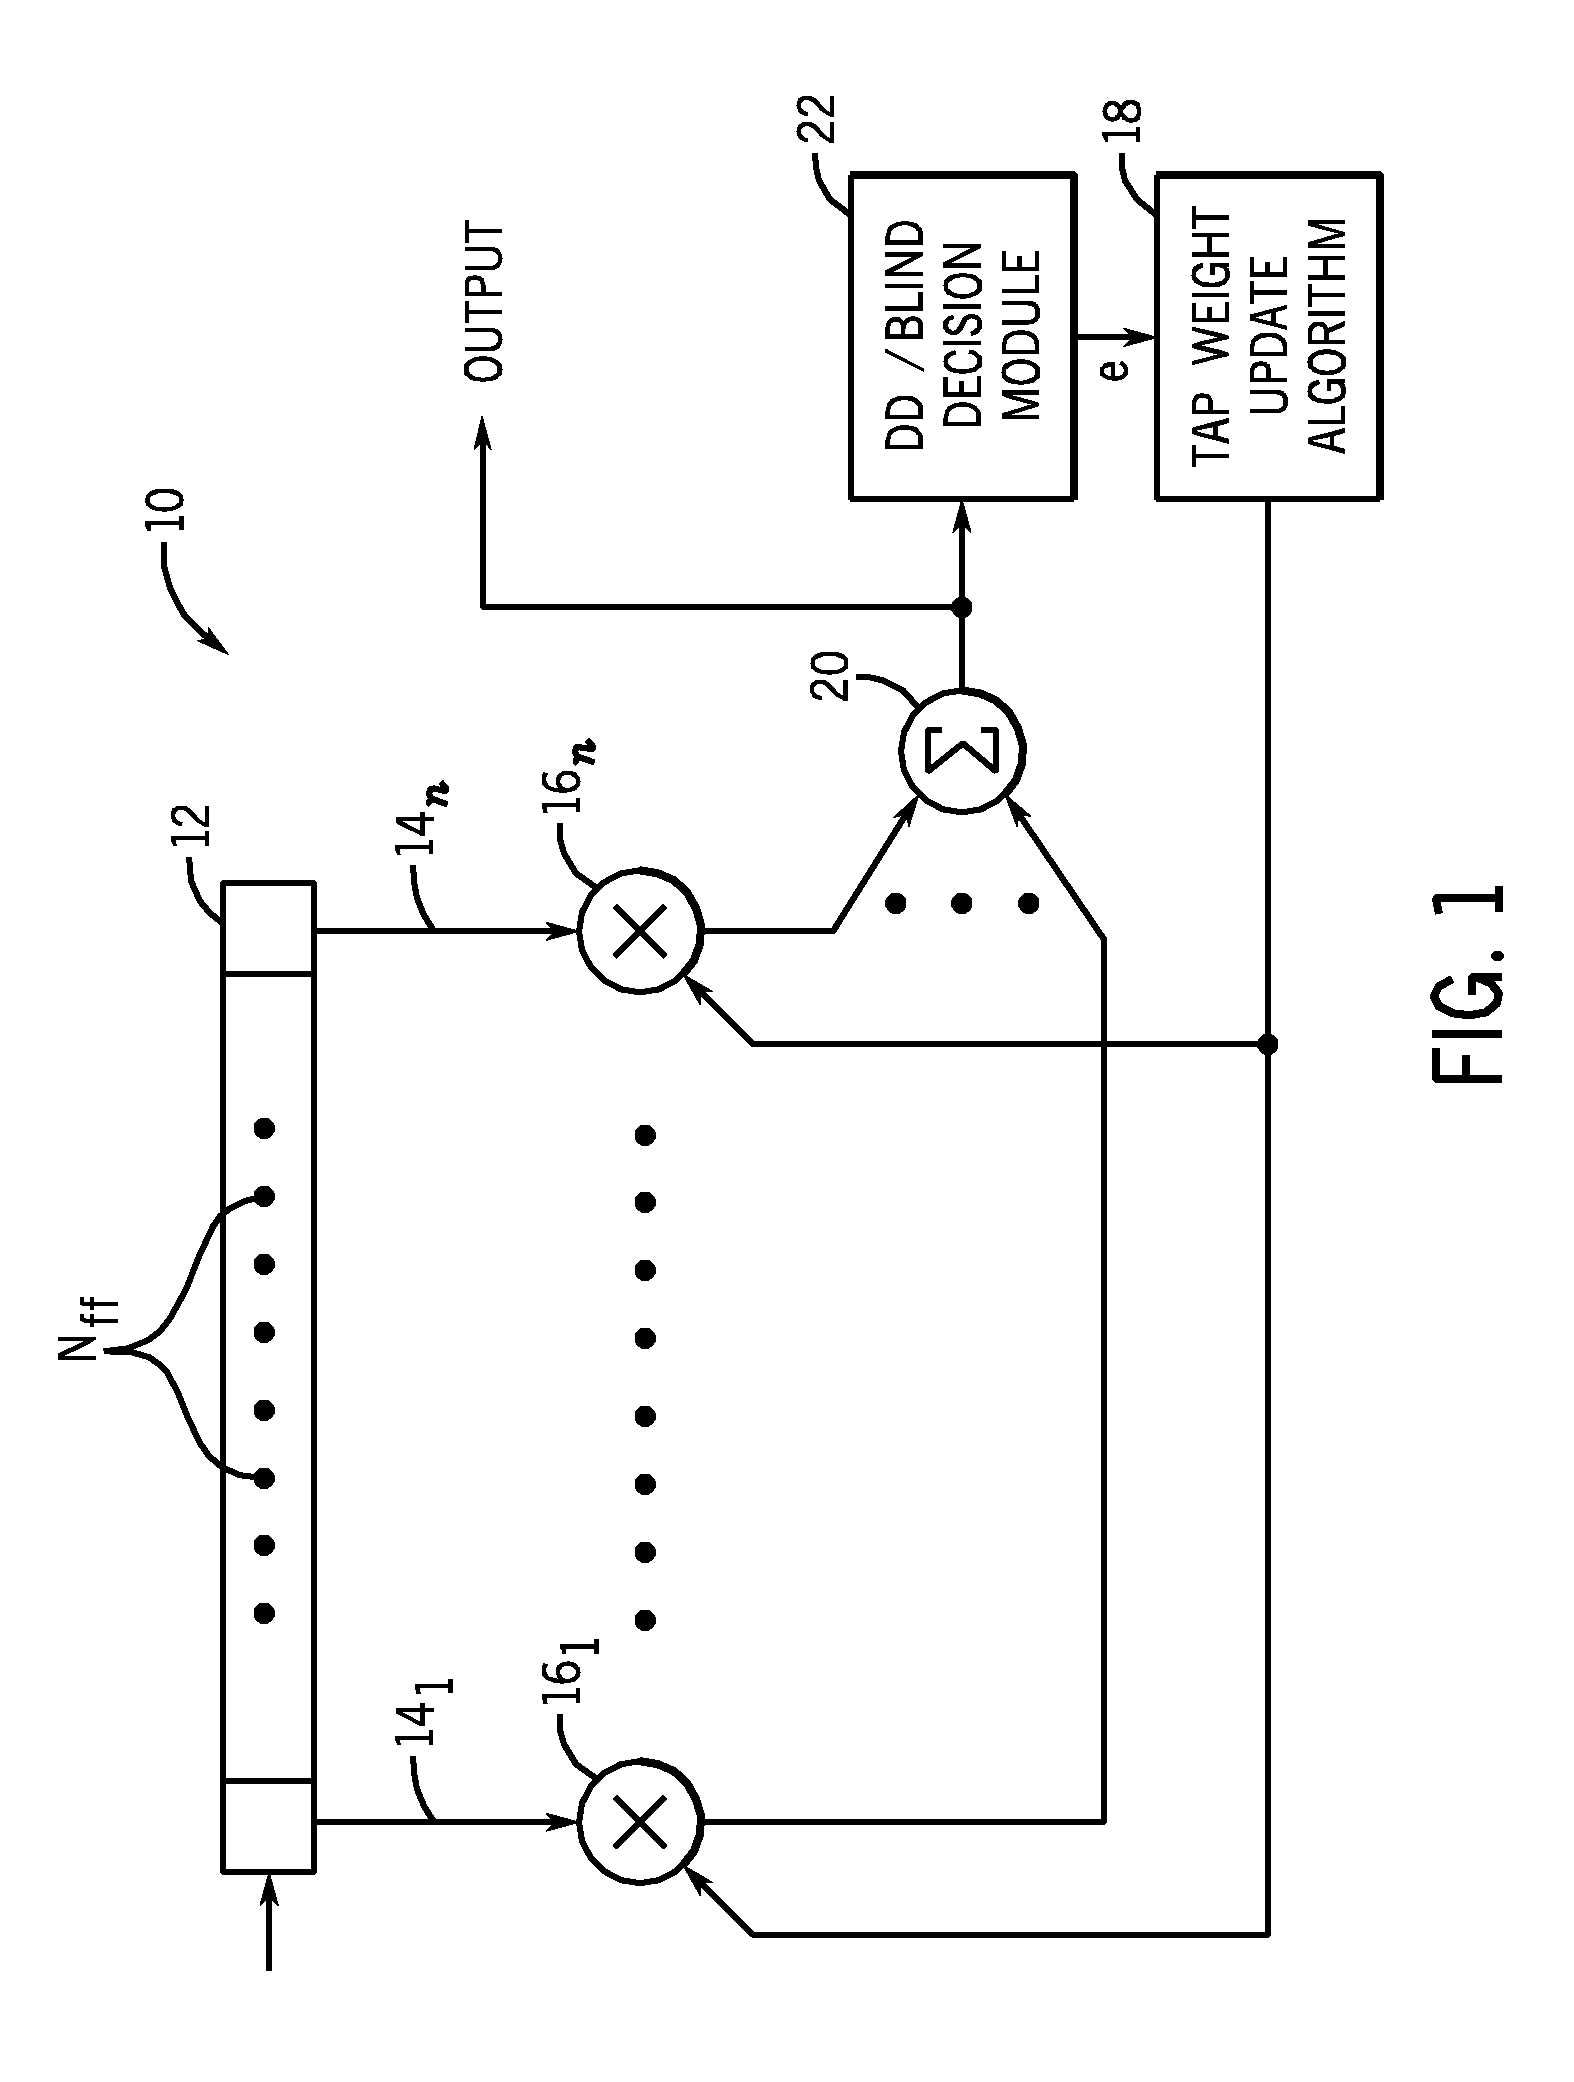 Communication system, apparatus and method